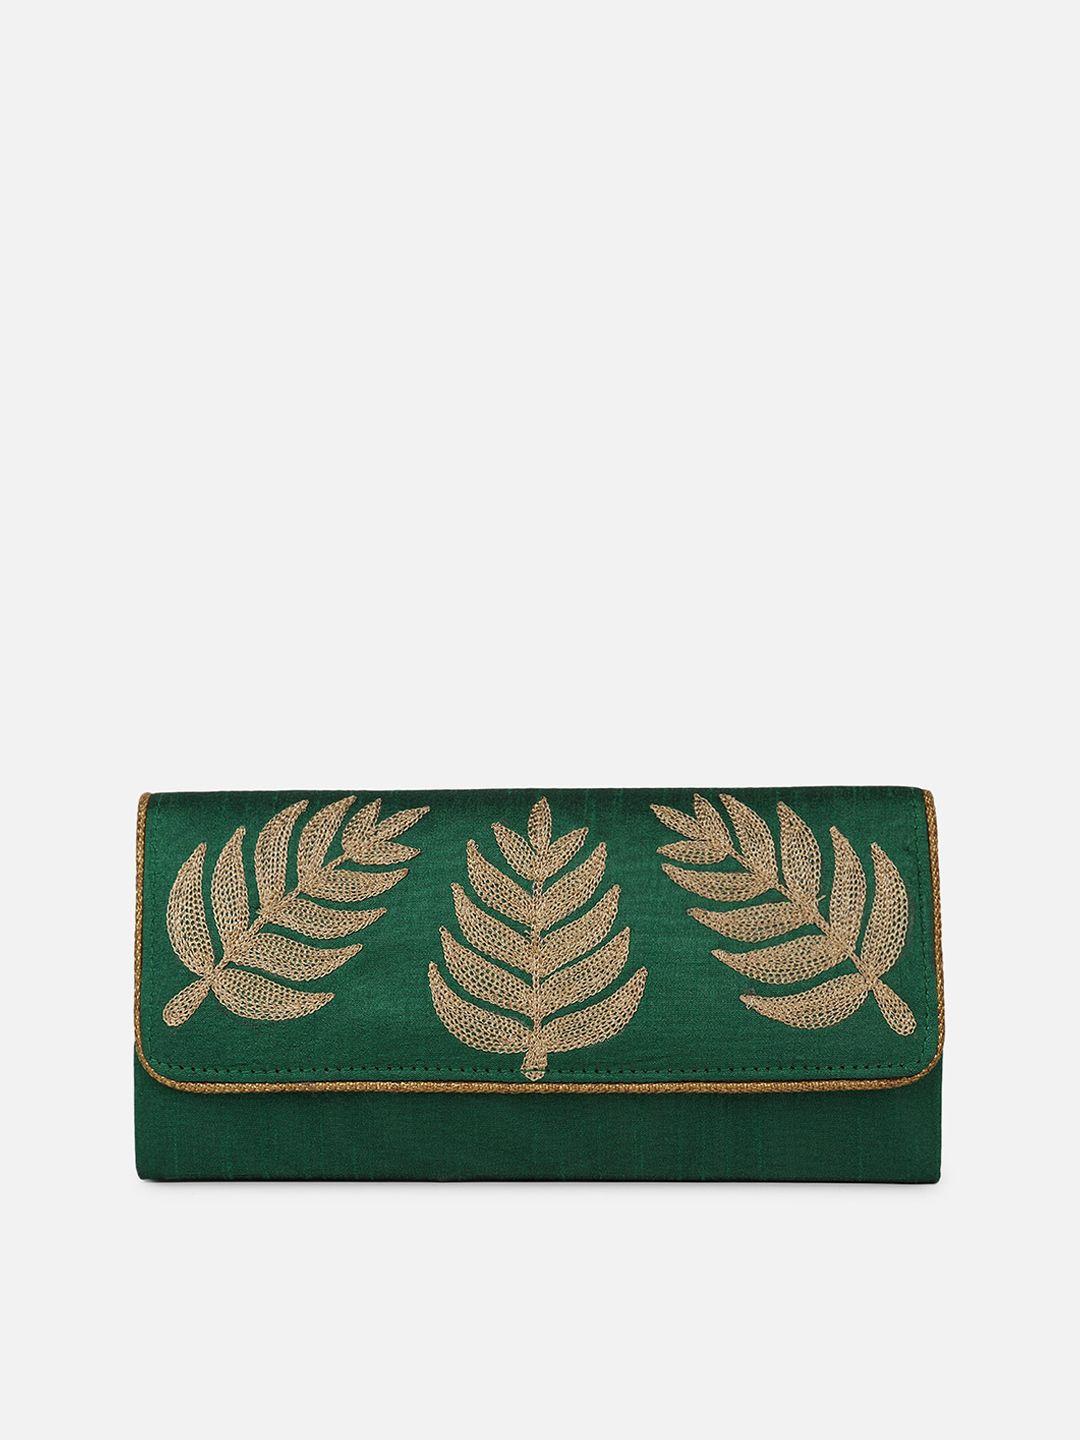 aditi wasan embroidered envelope clutch